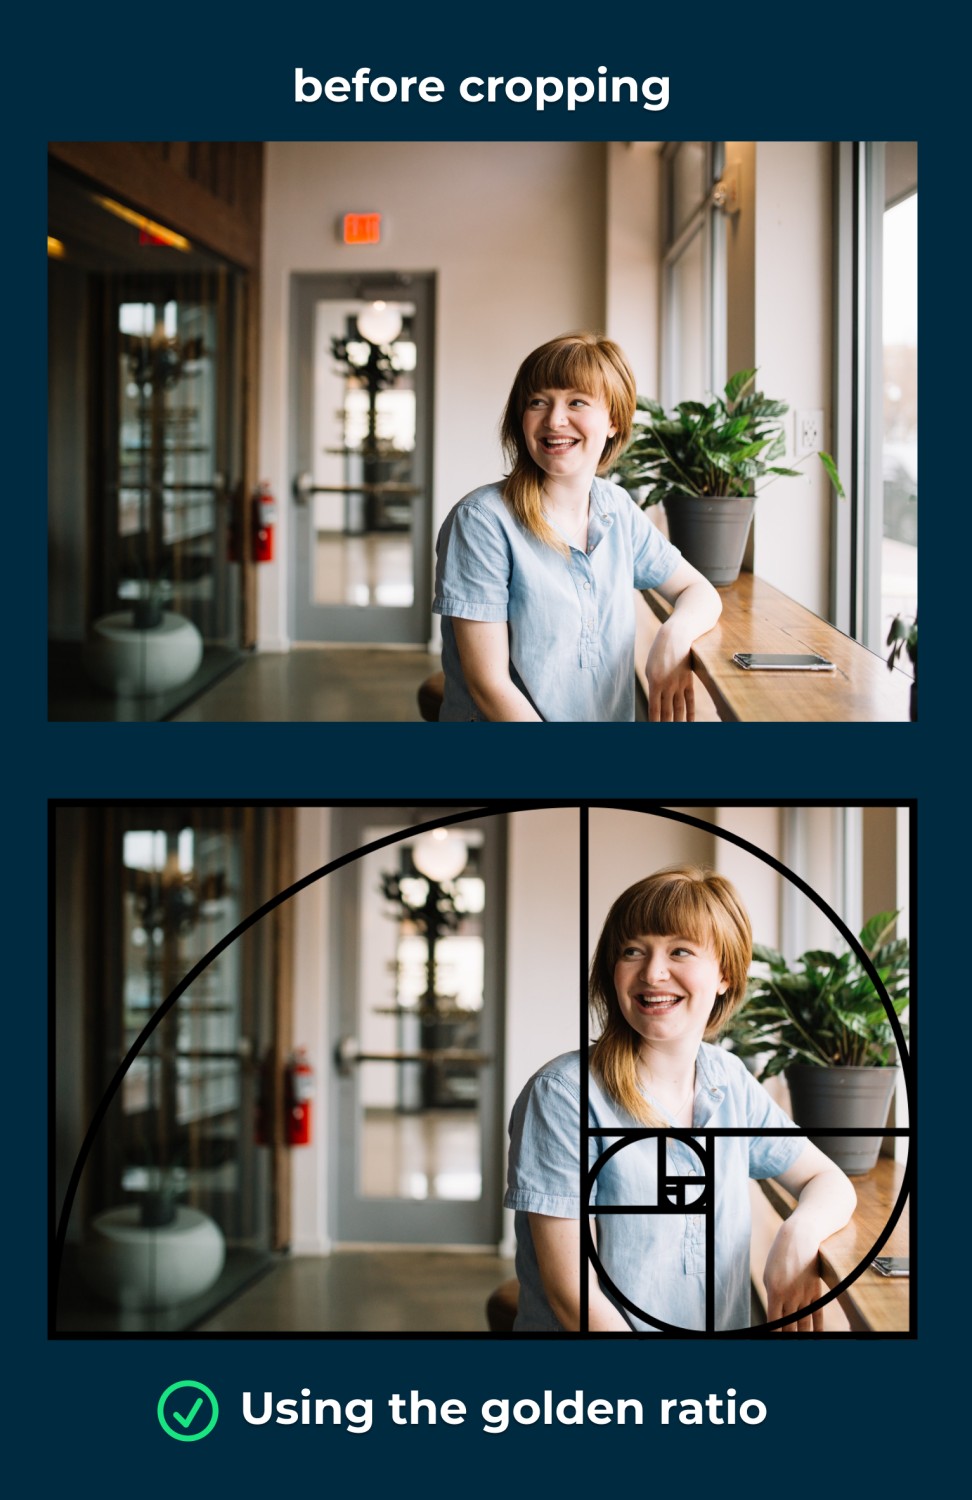 Example of an image of a woman smiling seating in an office using the golden ratio to make her the focus of the image.